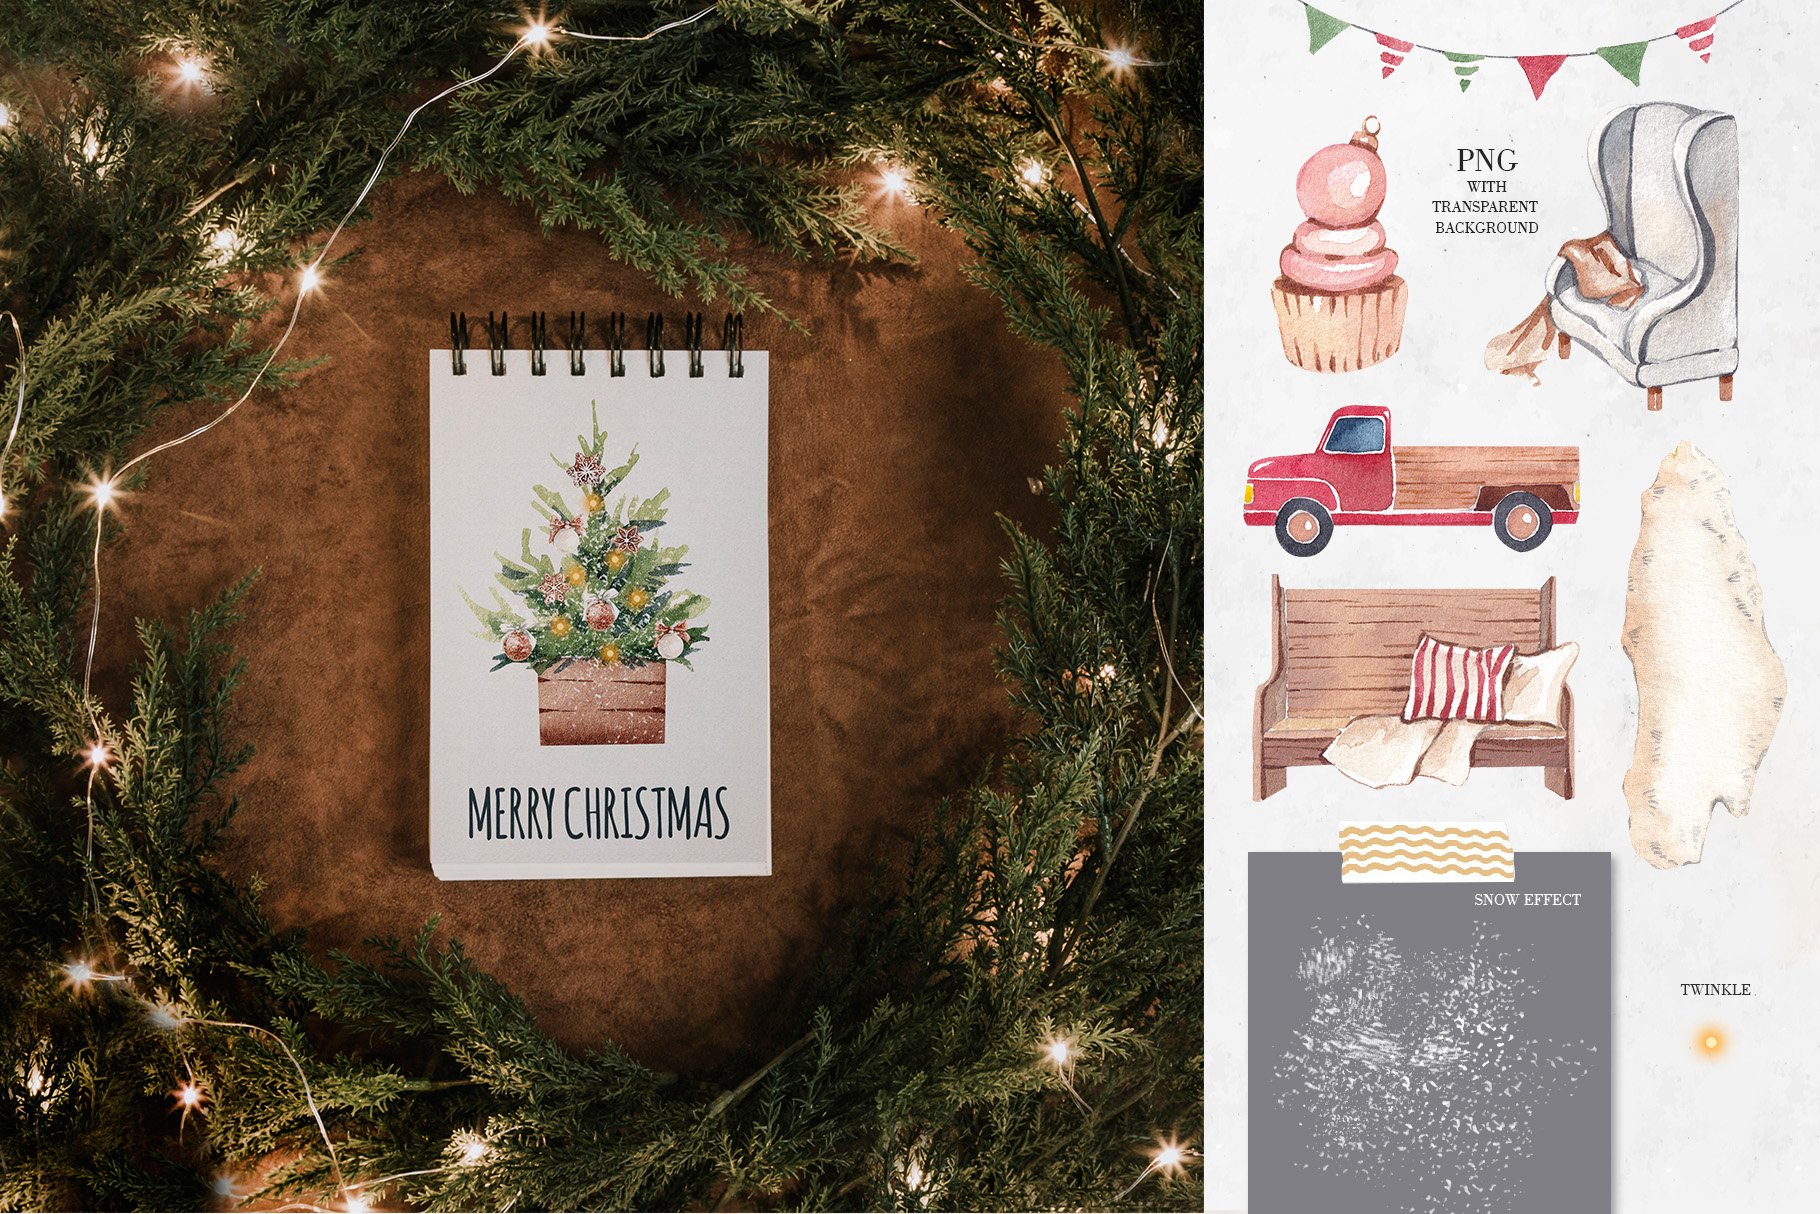 Festive Watercolor Christmas Kit Graphic by Skdesigns · Creative